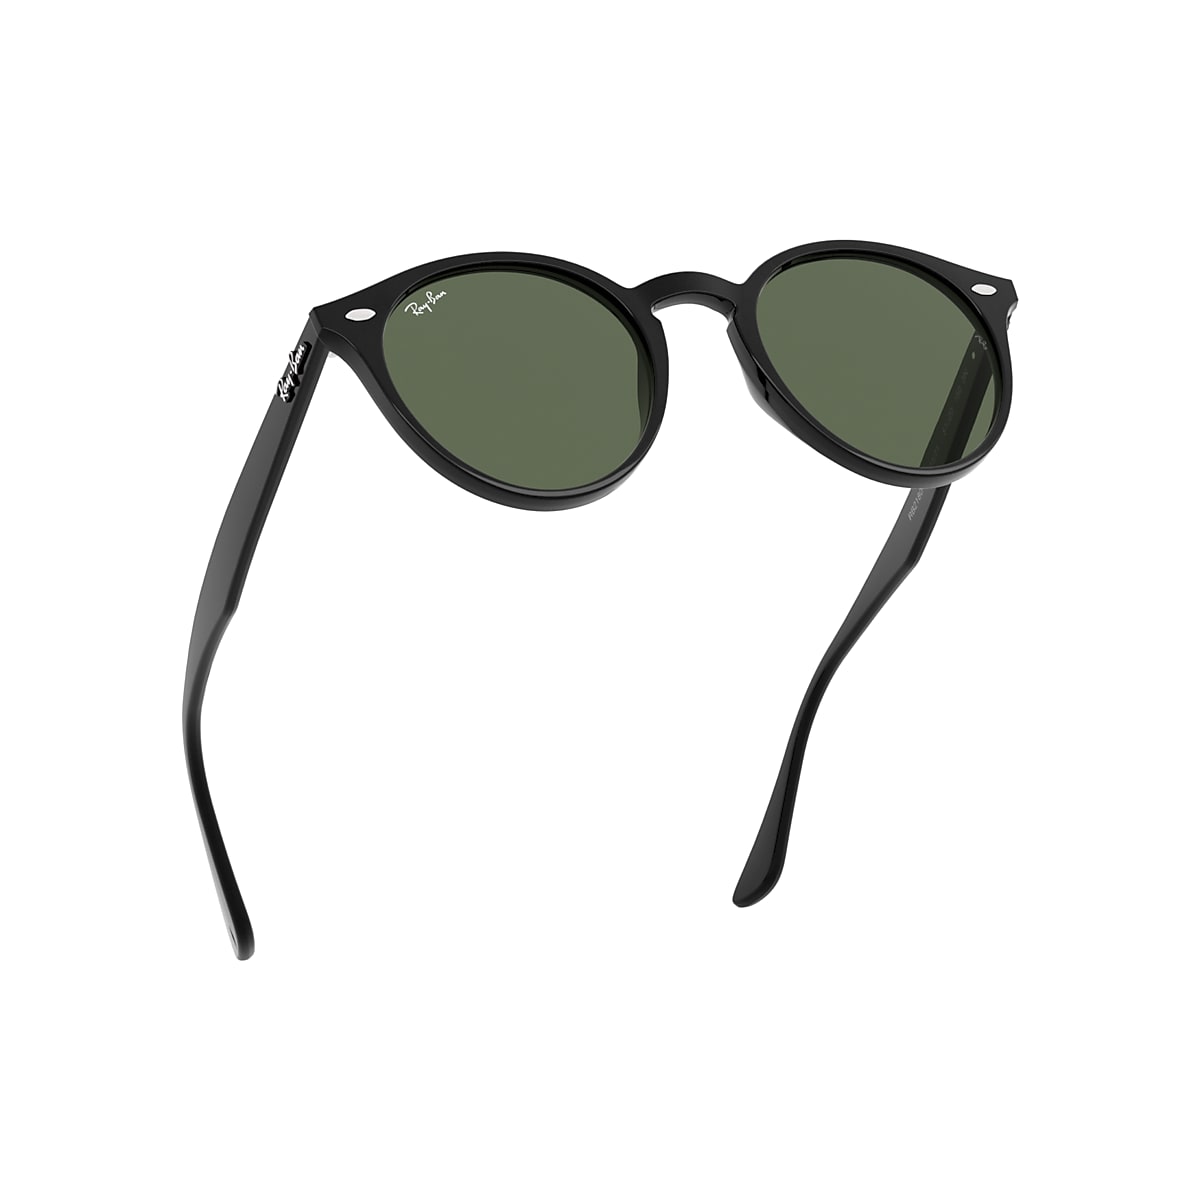 RB2180 Sunglasses in Black and Green - RB2180F | Ray-Ban® US